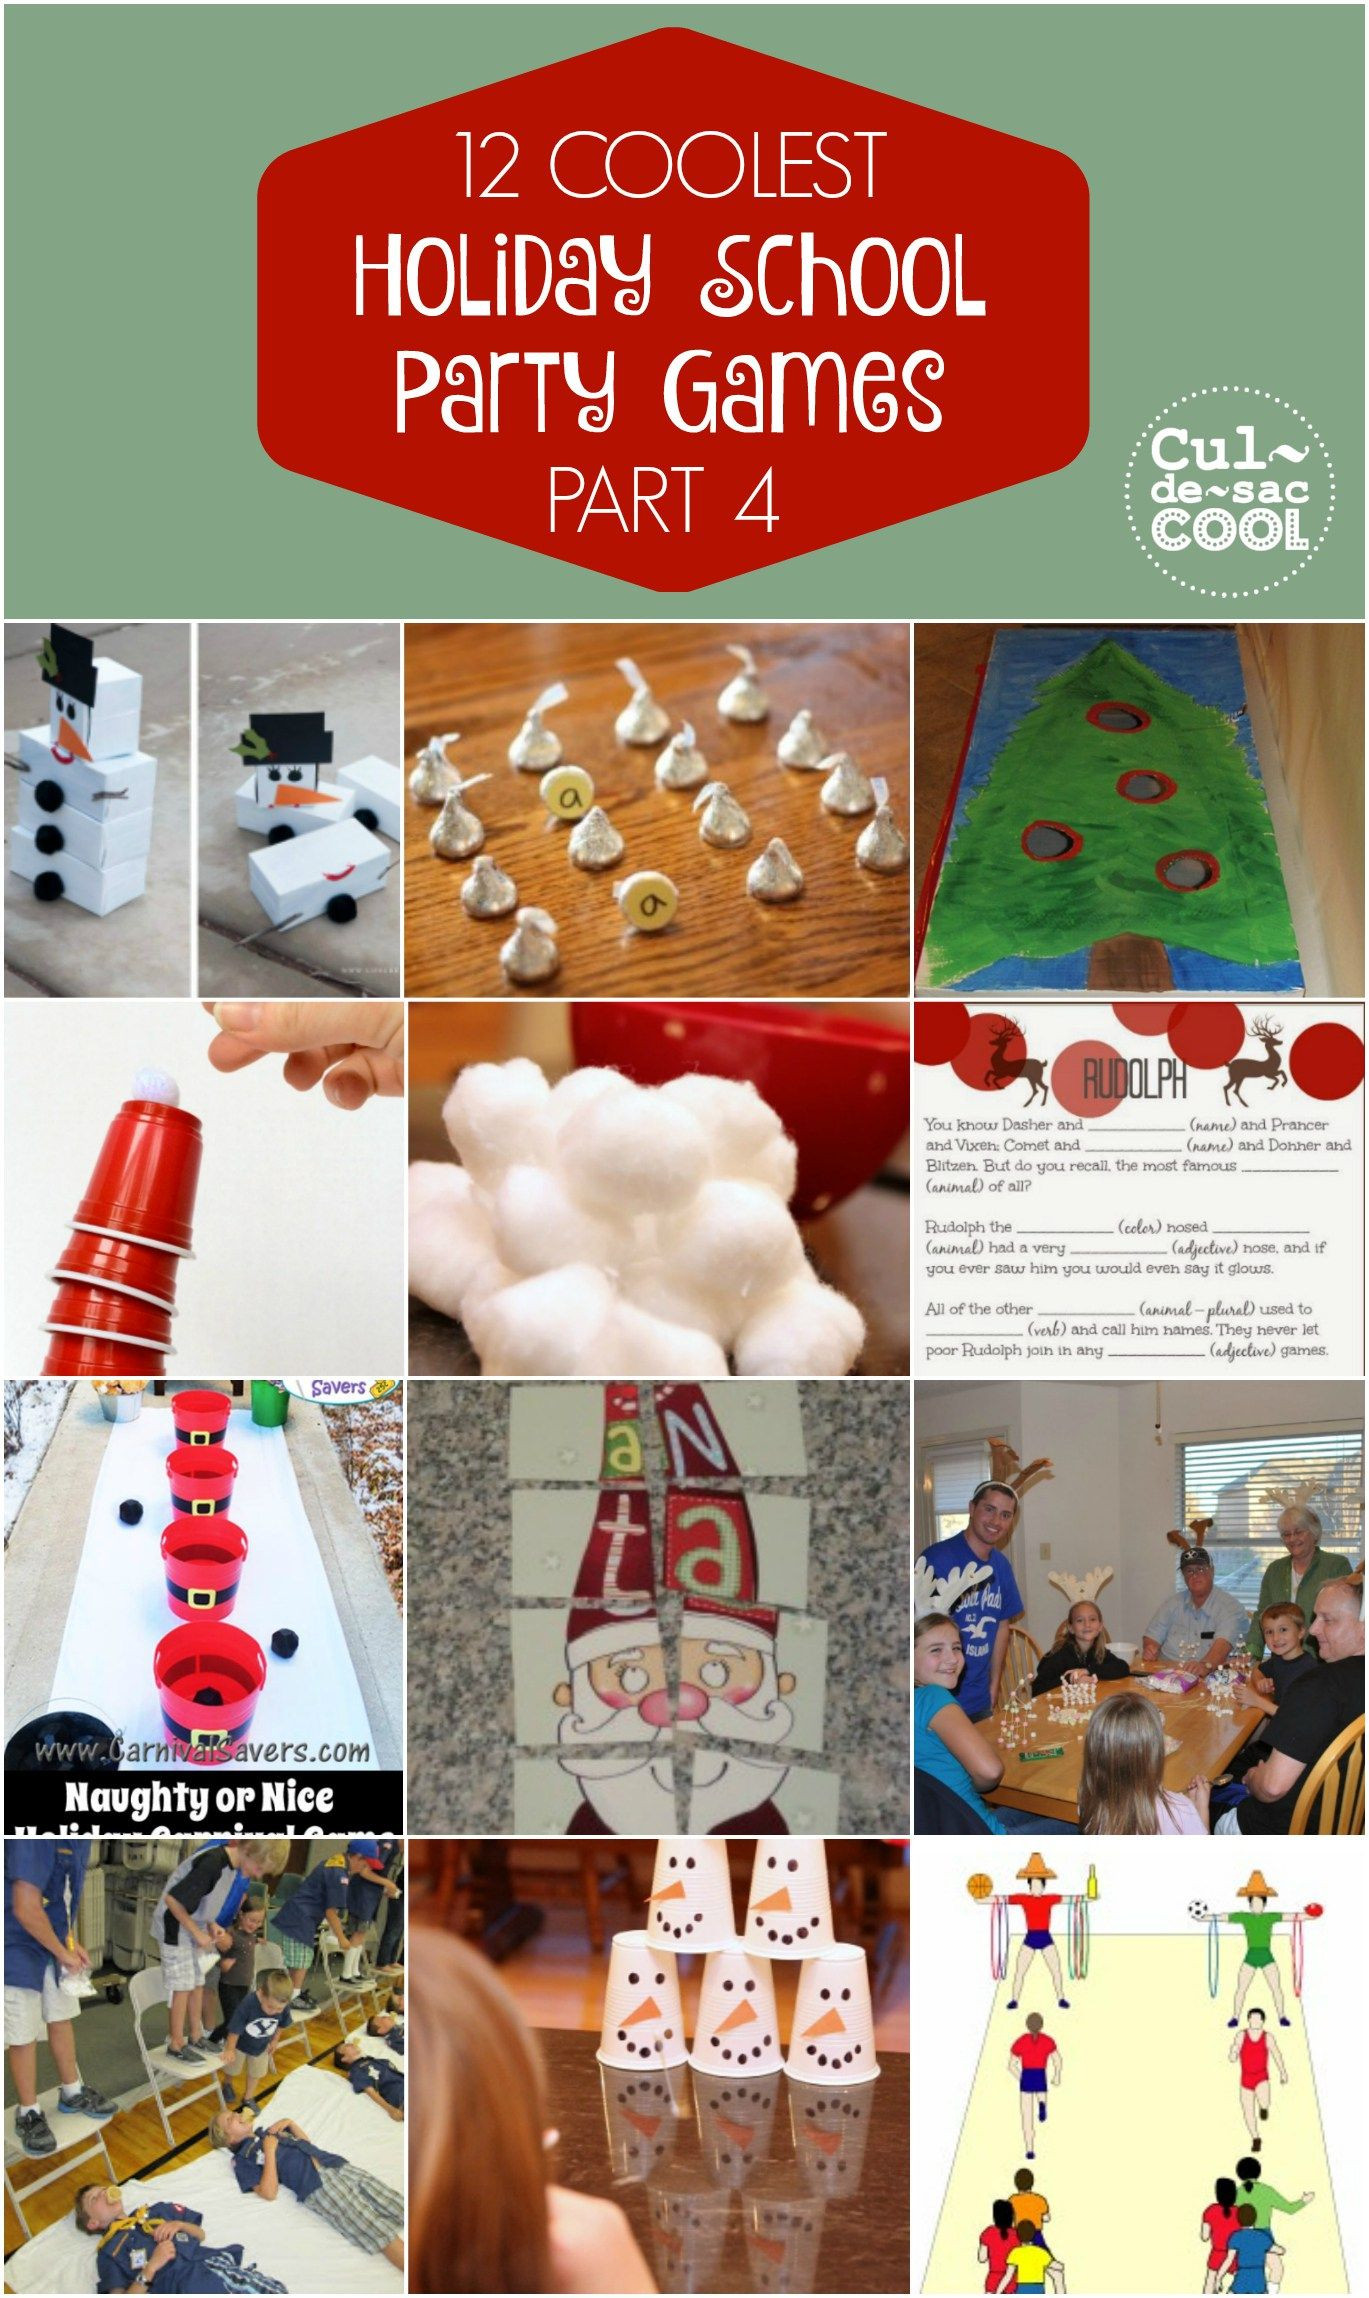 Kid Christmas Party Game Ideas
 12 Coolest Holiday School Party Games Part 4Collage